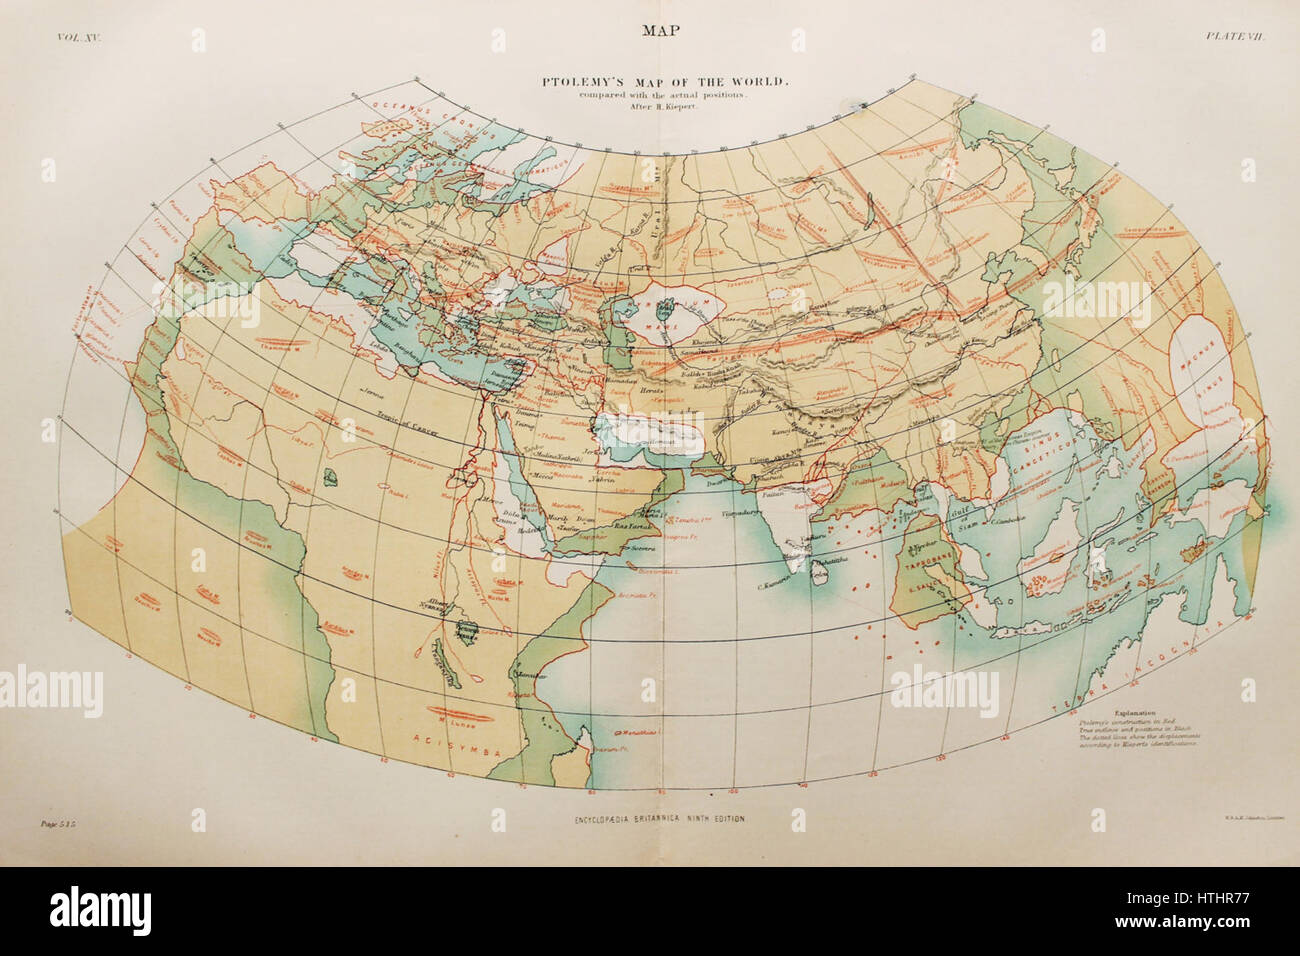 EB9 Vol XV Pl VII Ptolemy's Map of the World Stock Photo